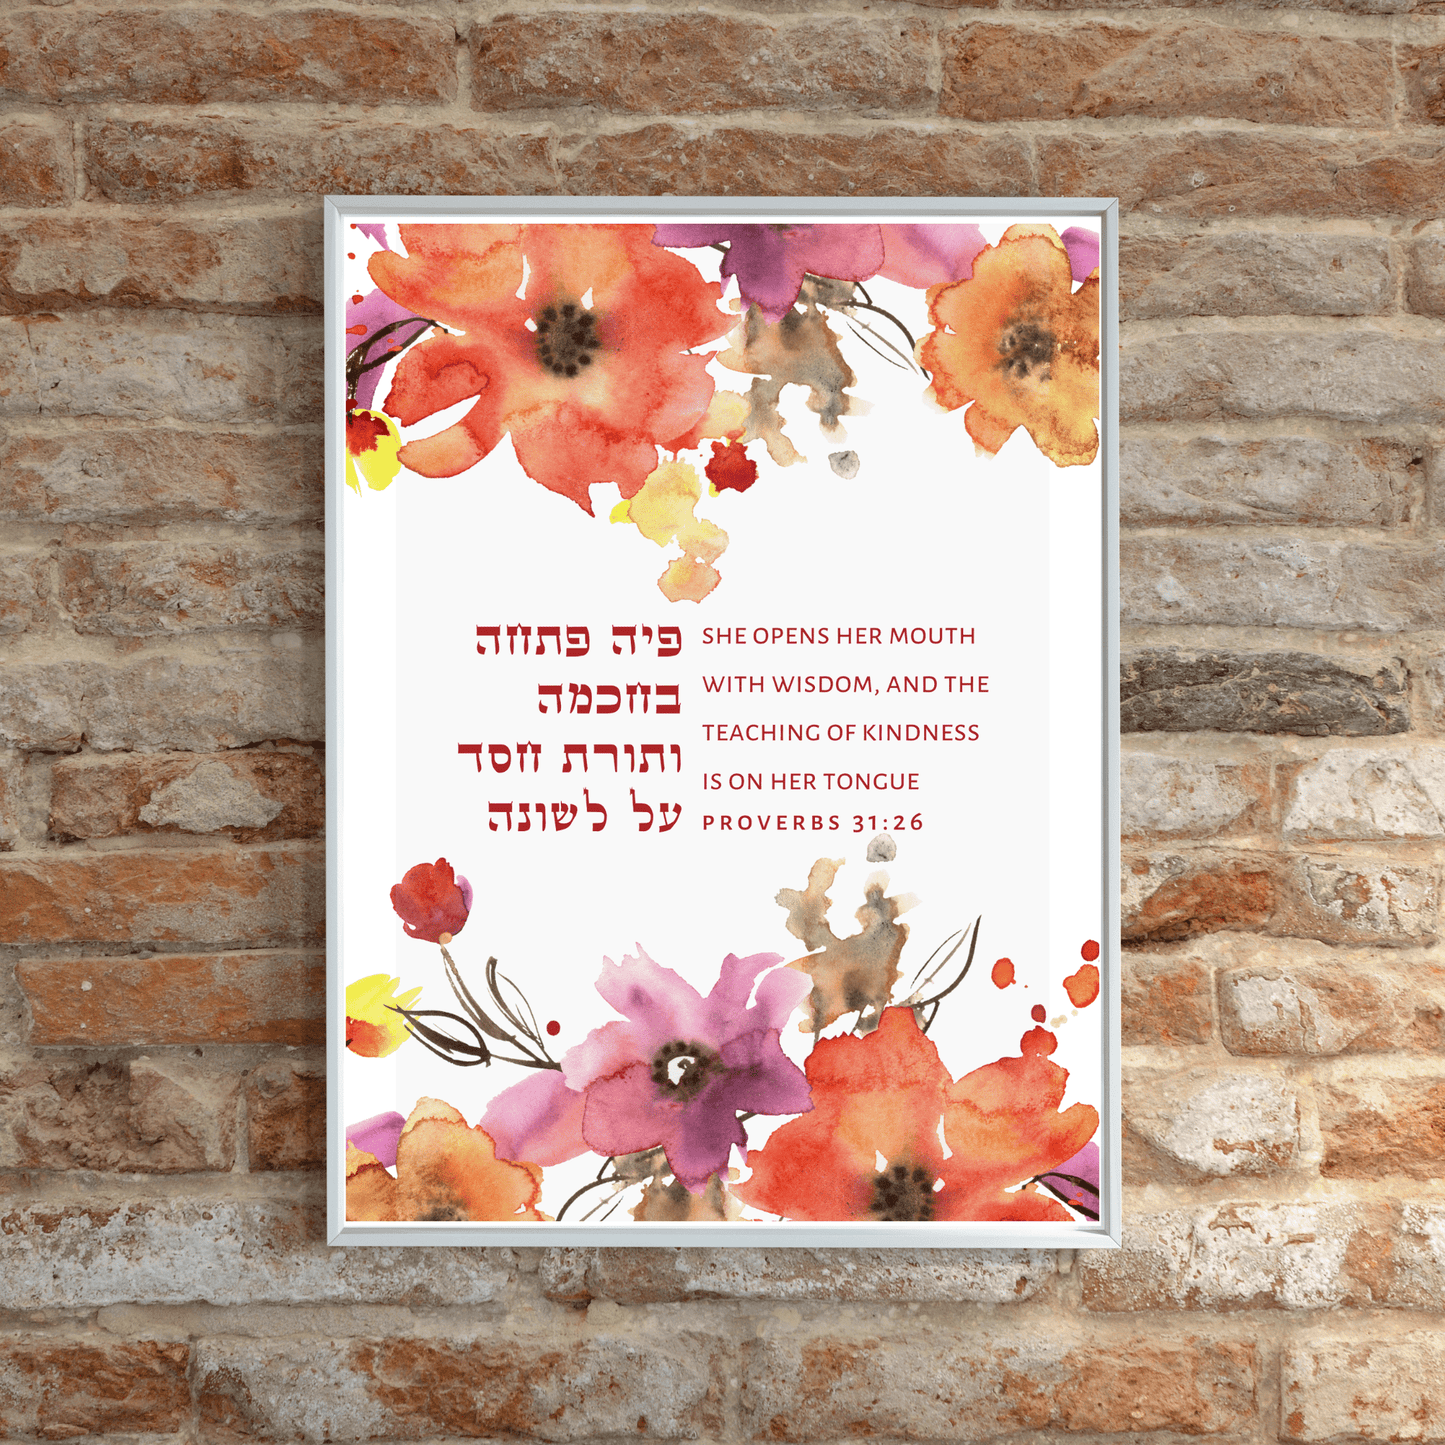 Gelato Proverbs 31:26 Wall Art Proverbs 31:26 | Gifts for Her Wife Anniversary Birthday